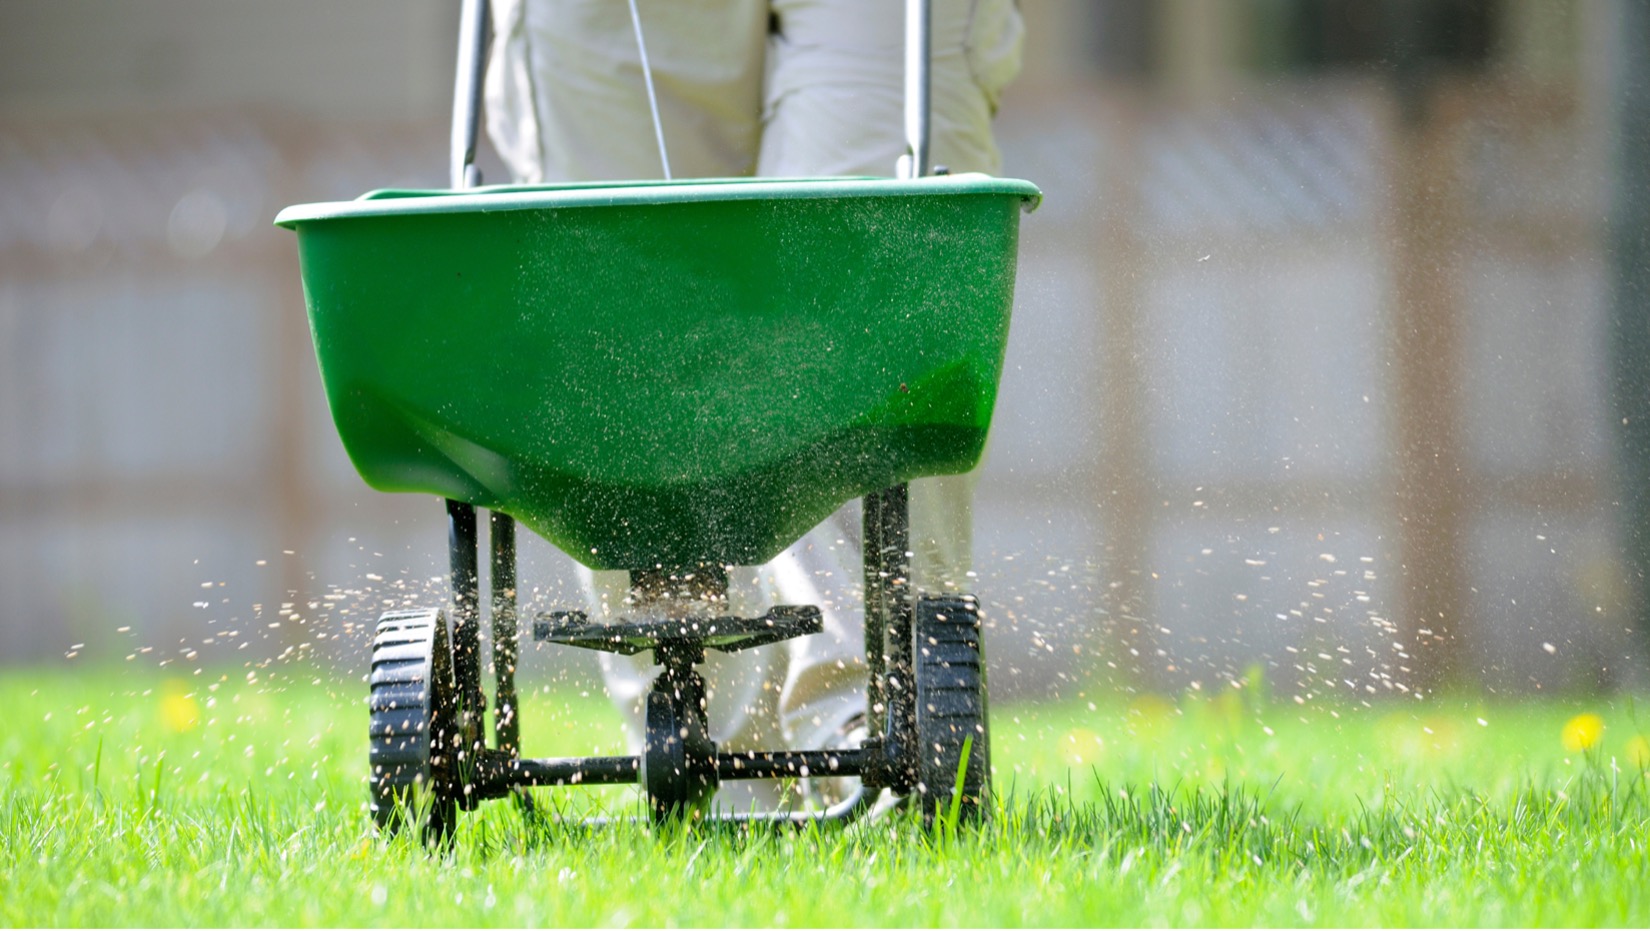 Lawn Care Company in Overland Park